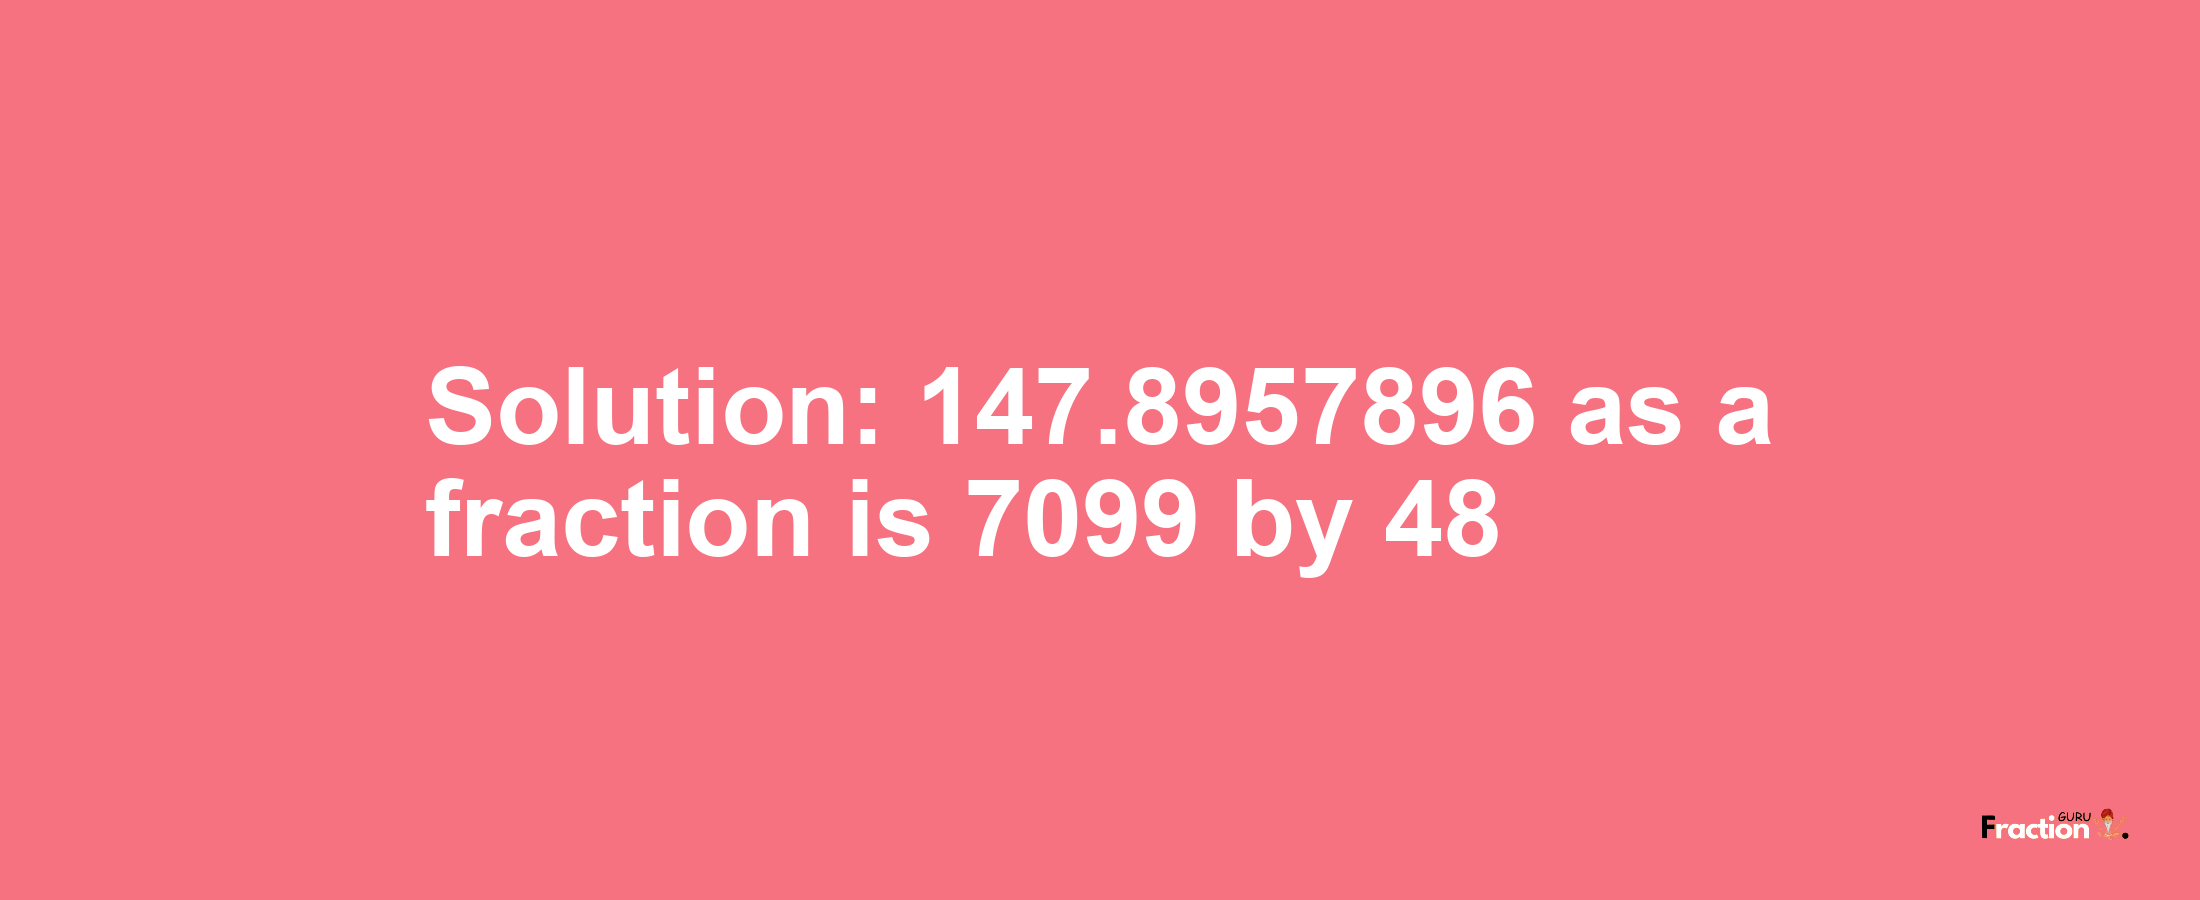 Solution:147.8957896 as a fraction is 7099/48